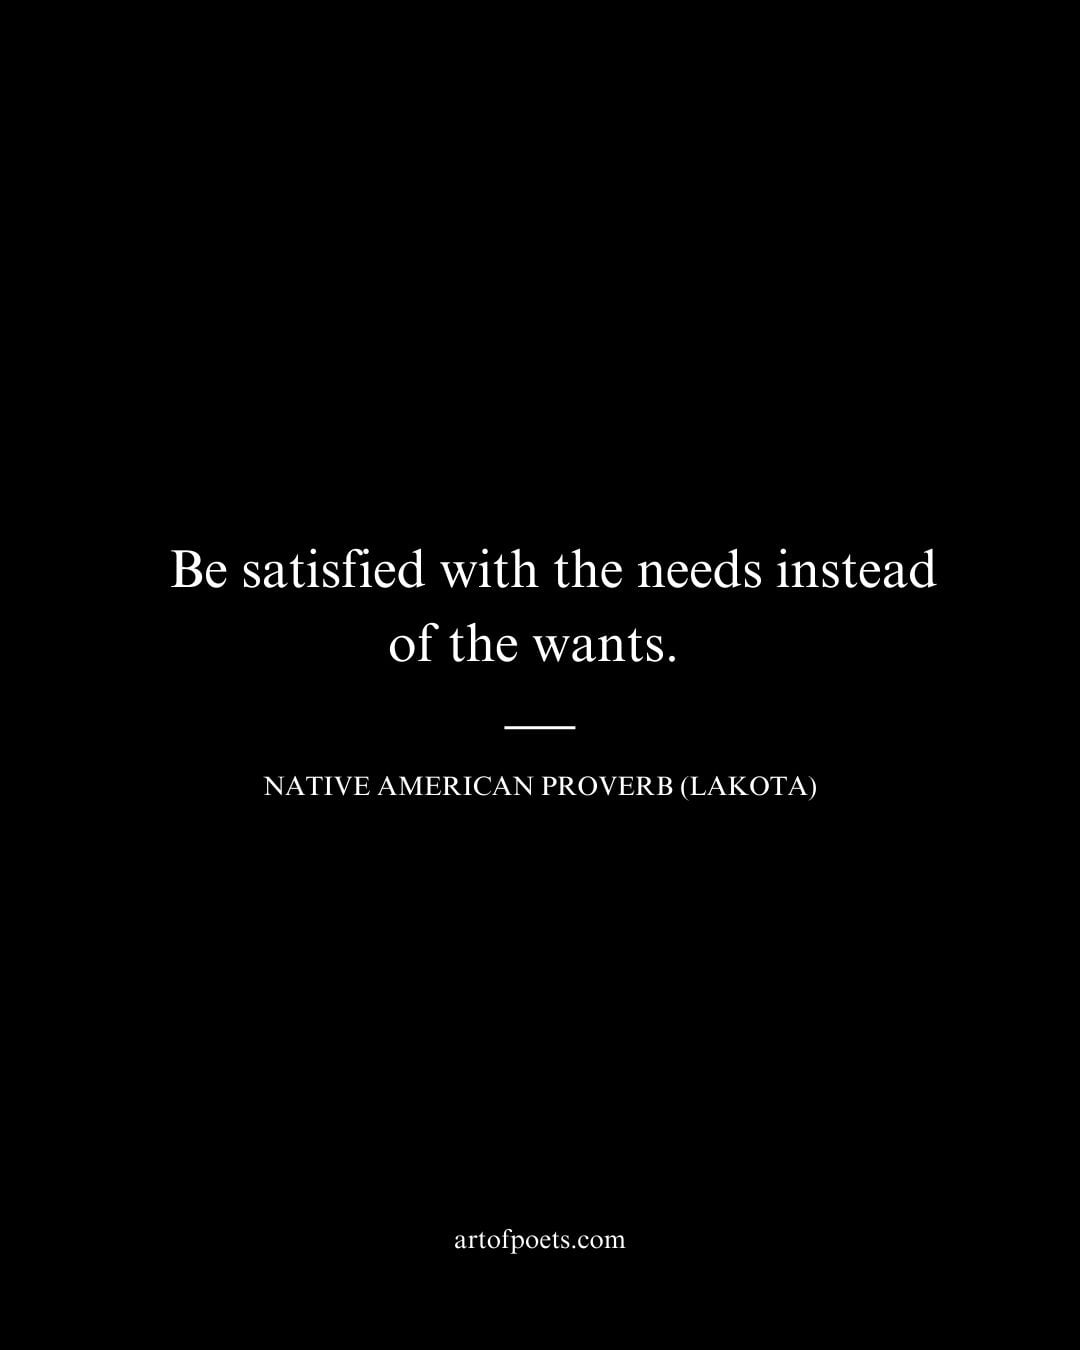 Be satisfied with the needs instead of the wants